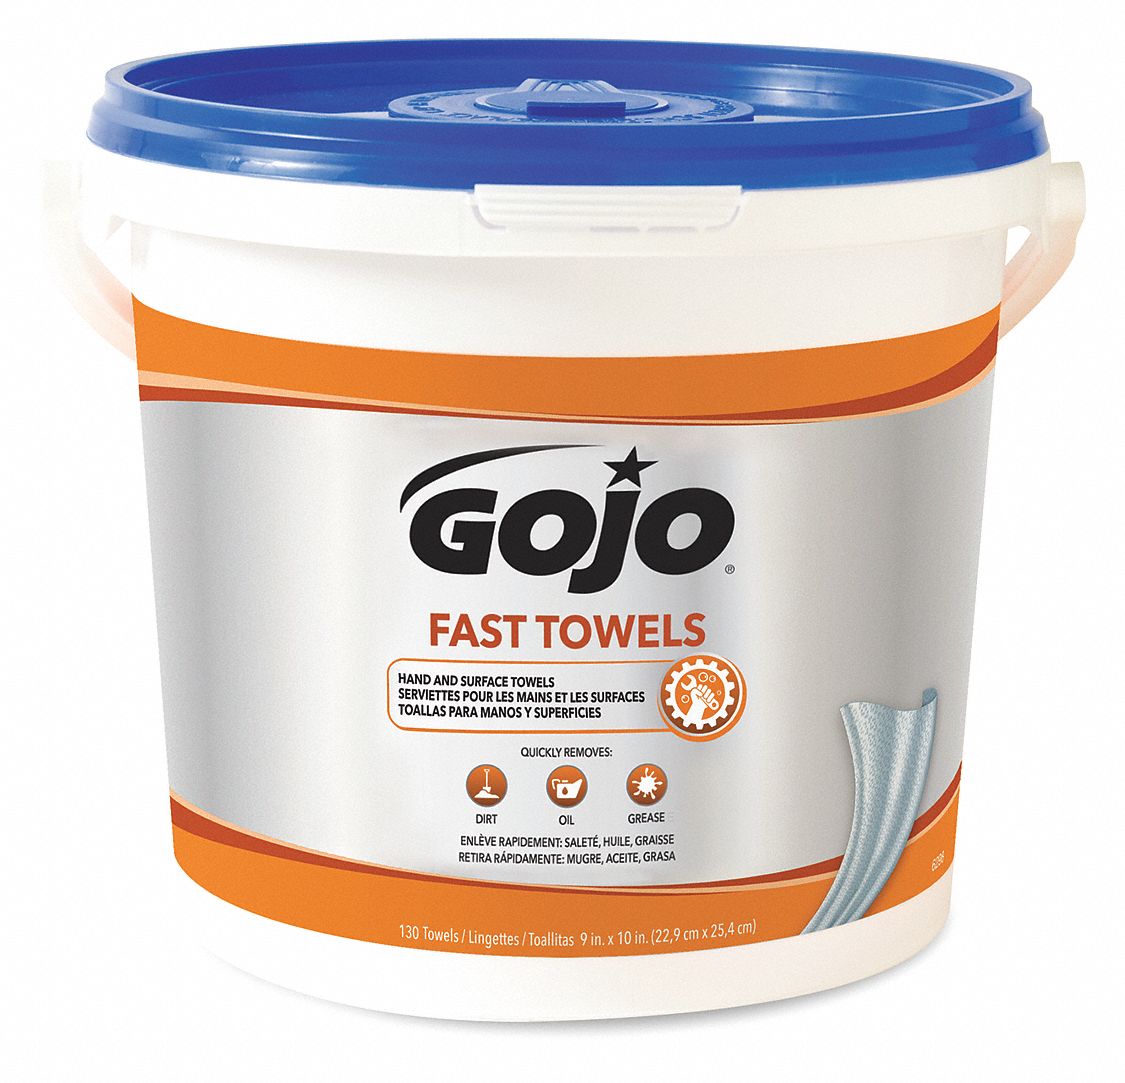 GOJO Fast Towels: Bucket, 9 in x 10 in Sheet Size, 130 Wipes per Container, 4 PK